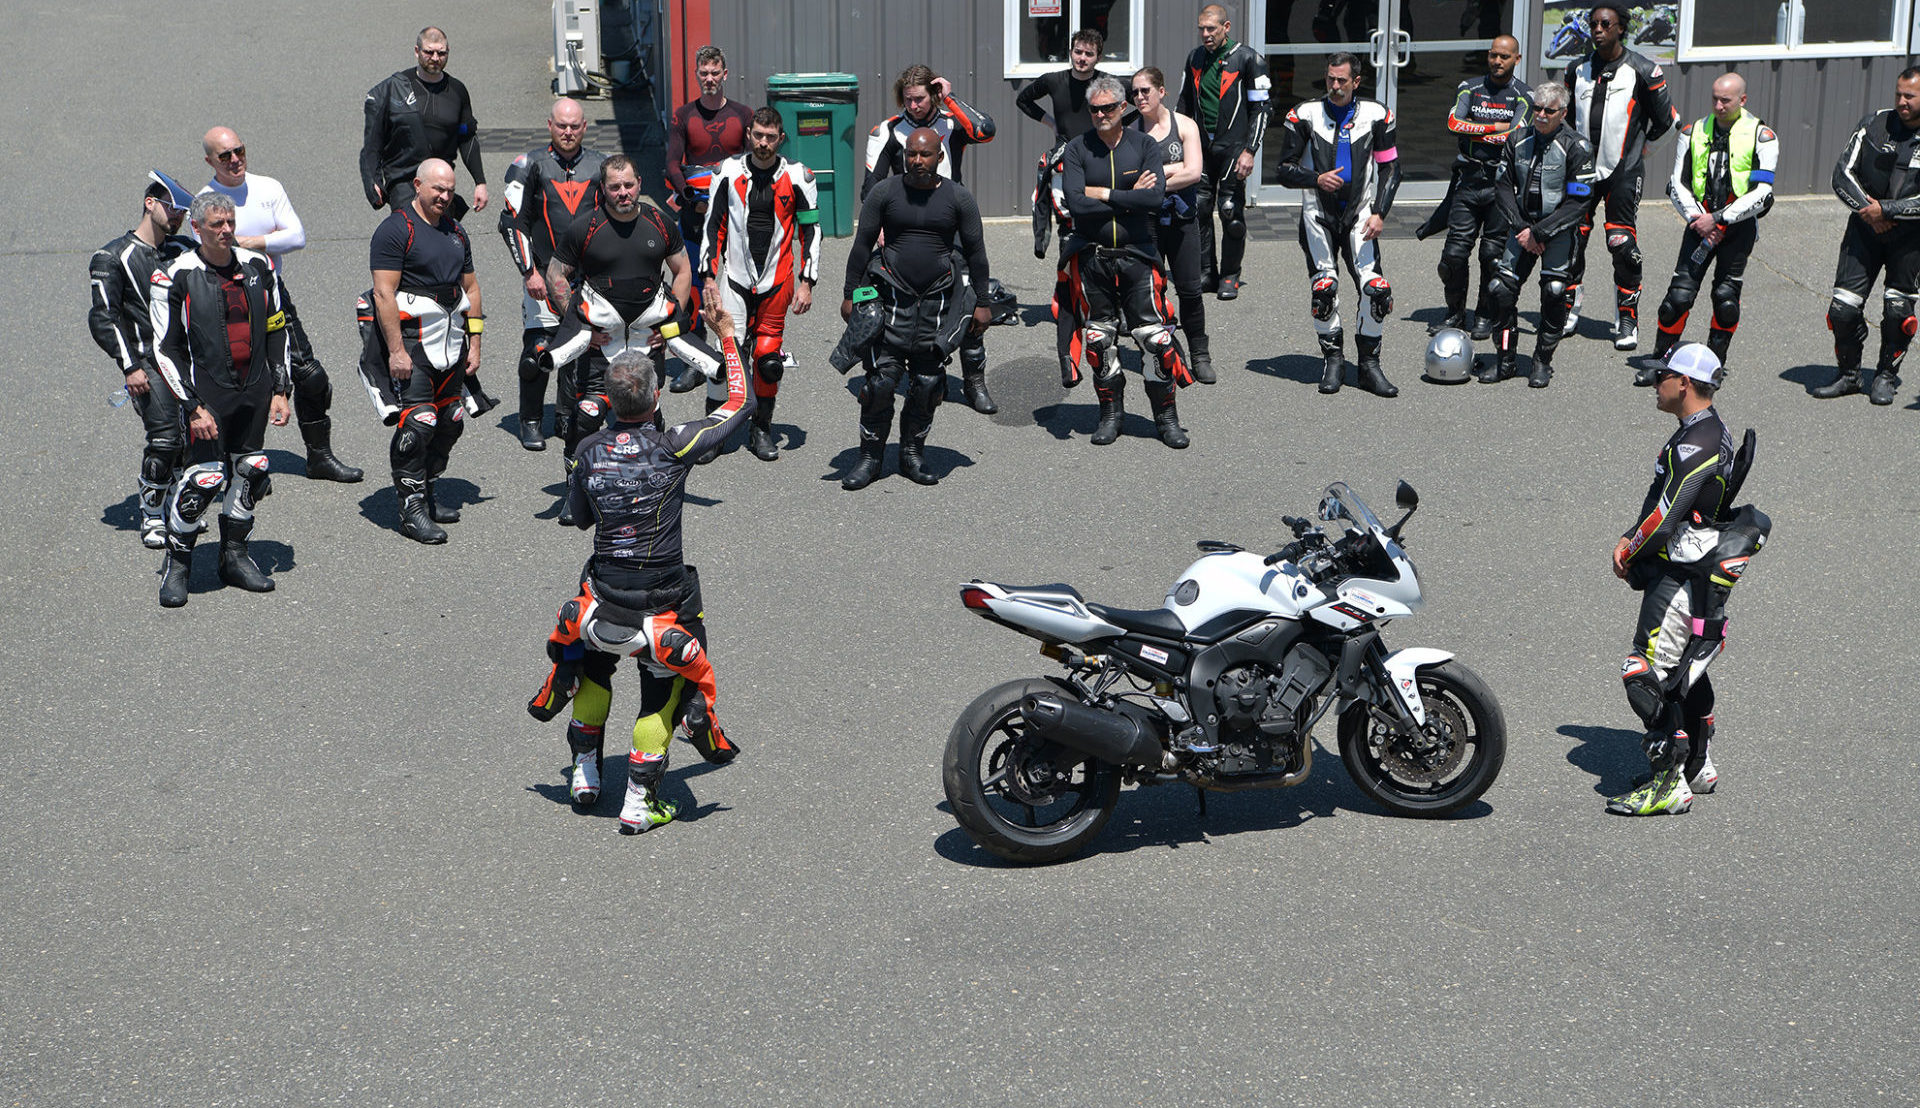 A scene from a Yamaha Champions Riding School at New Jersey Motorsports Park. Photo by SBImage, courtesy YCRS.